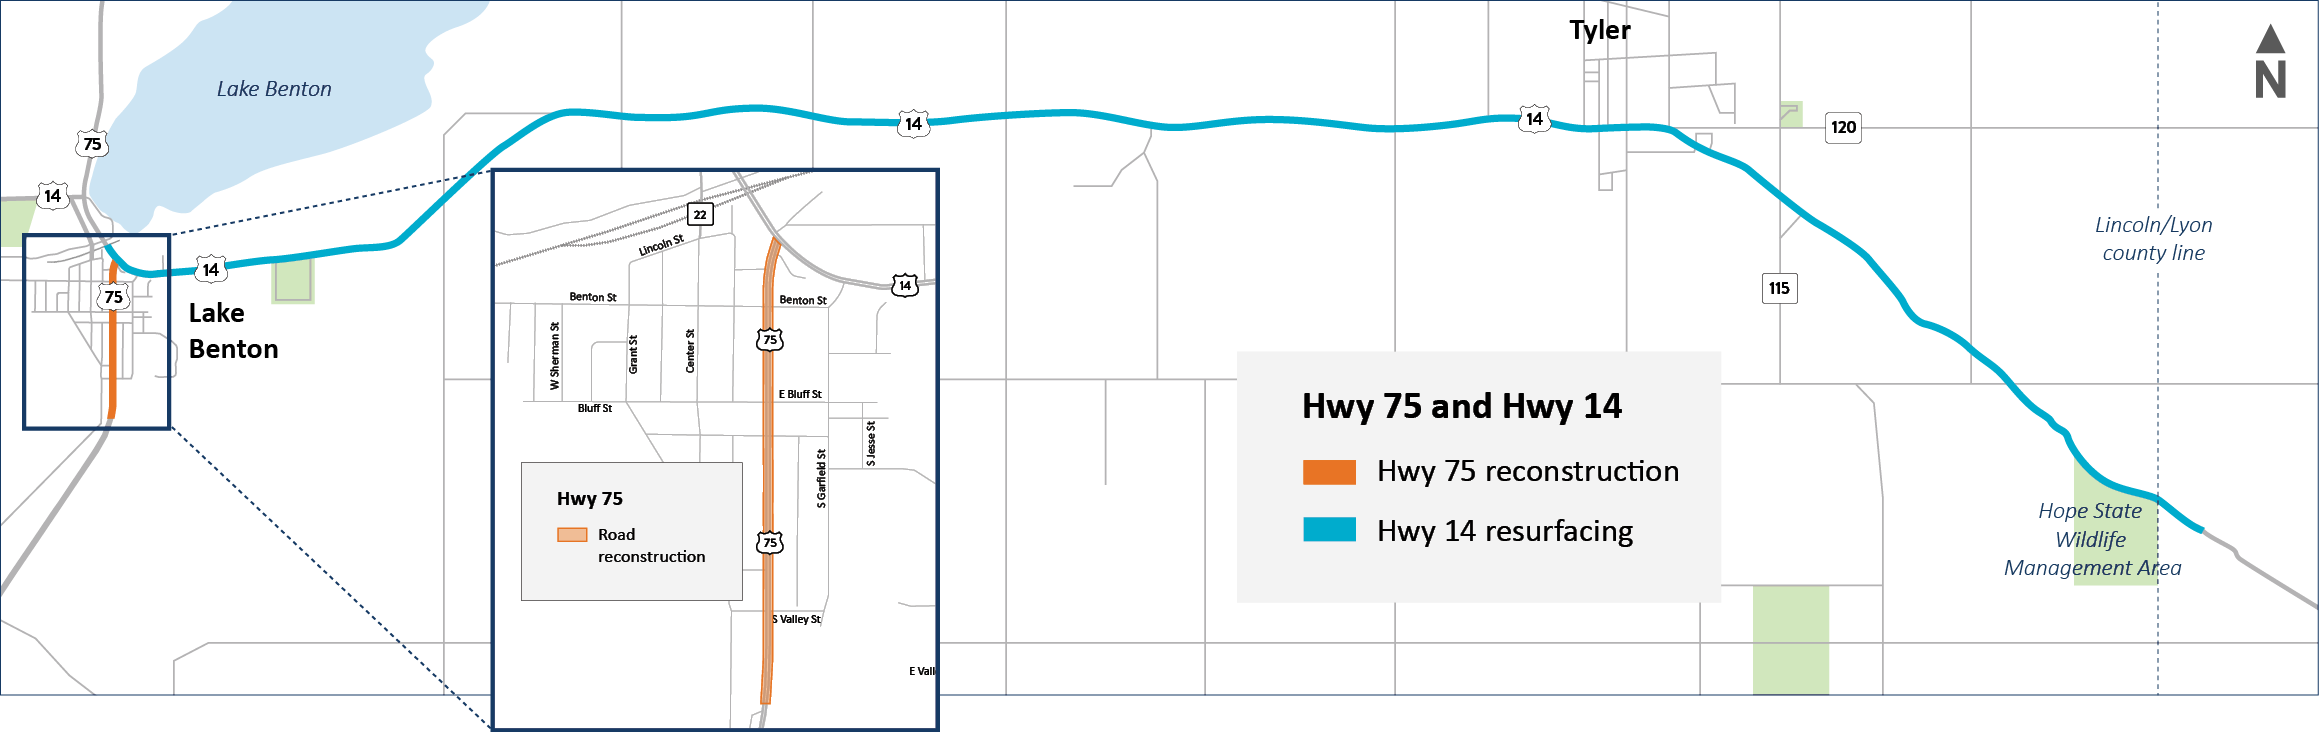 Graphic project map showing work on Hwy 75 in Lake Benton as well as along Hwy 14.